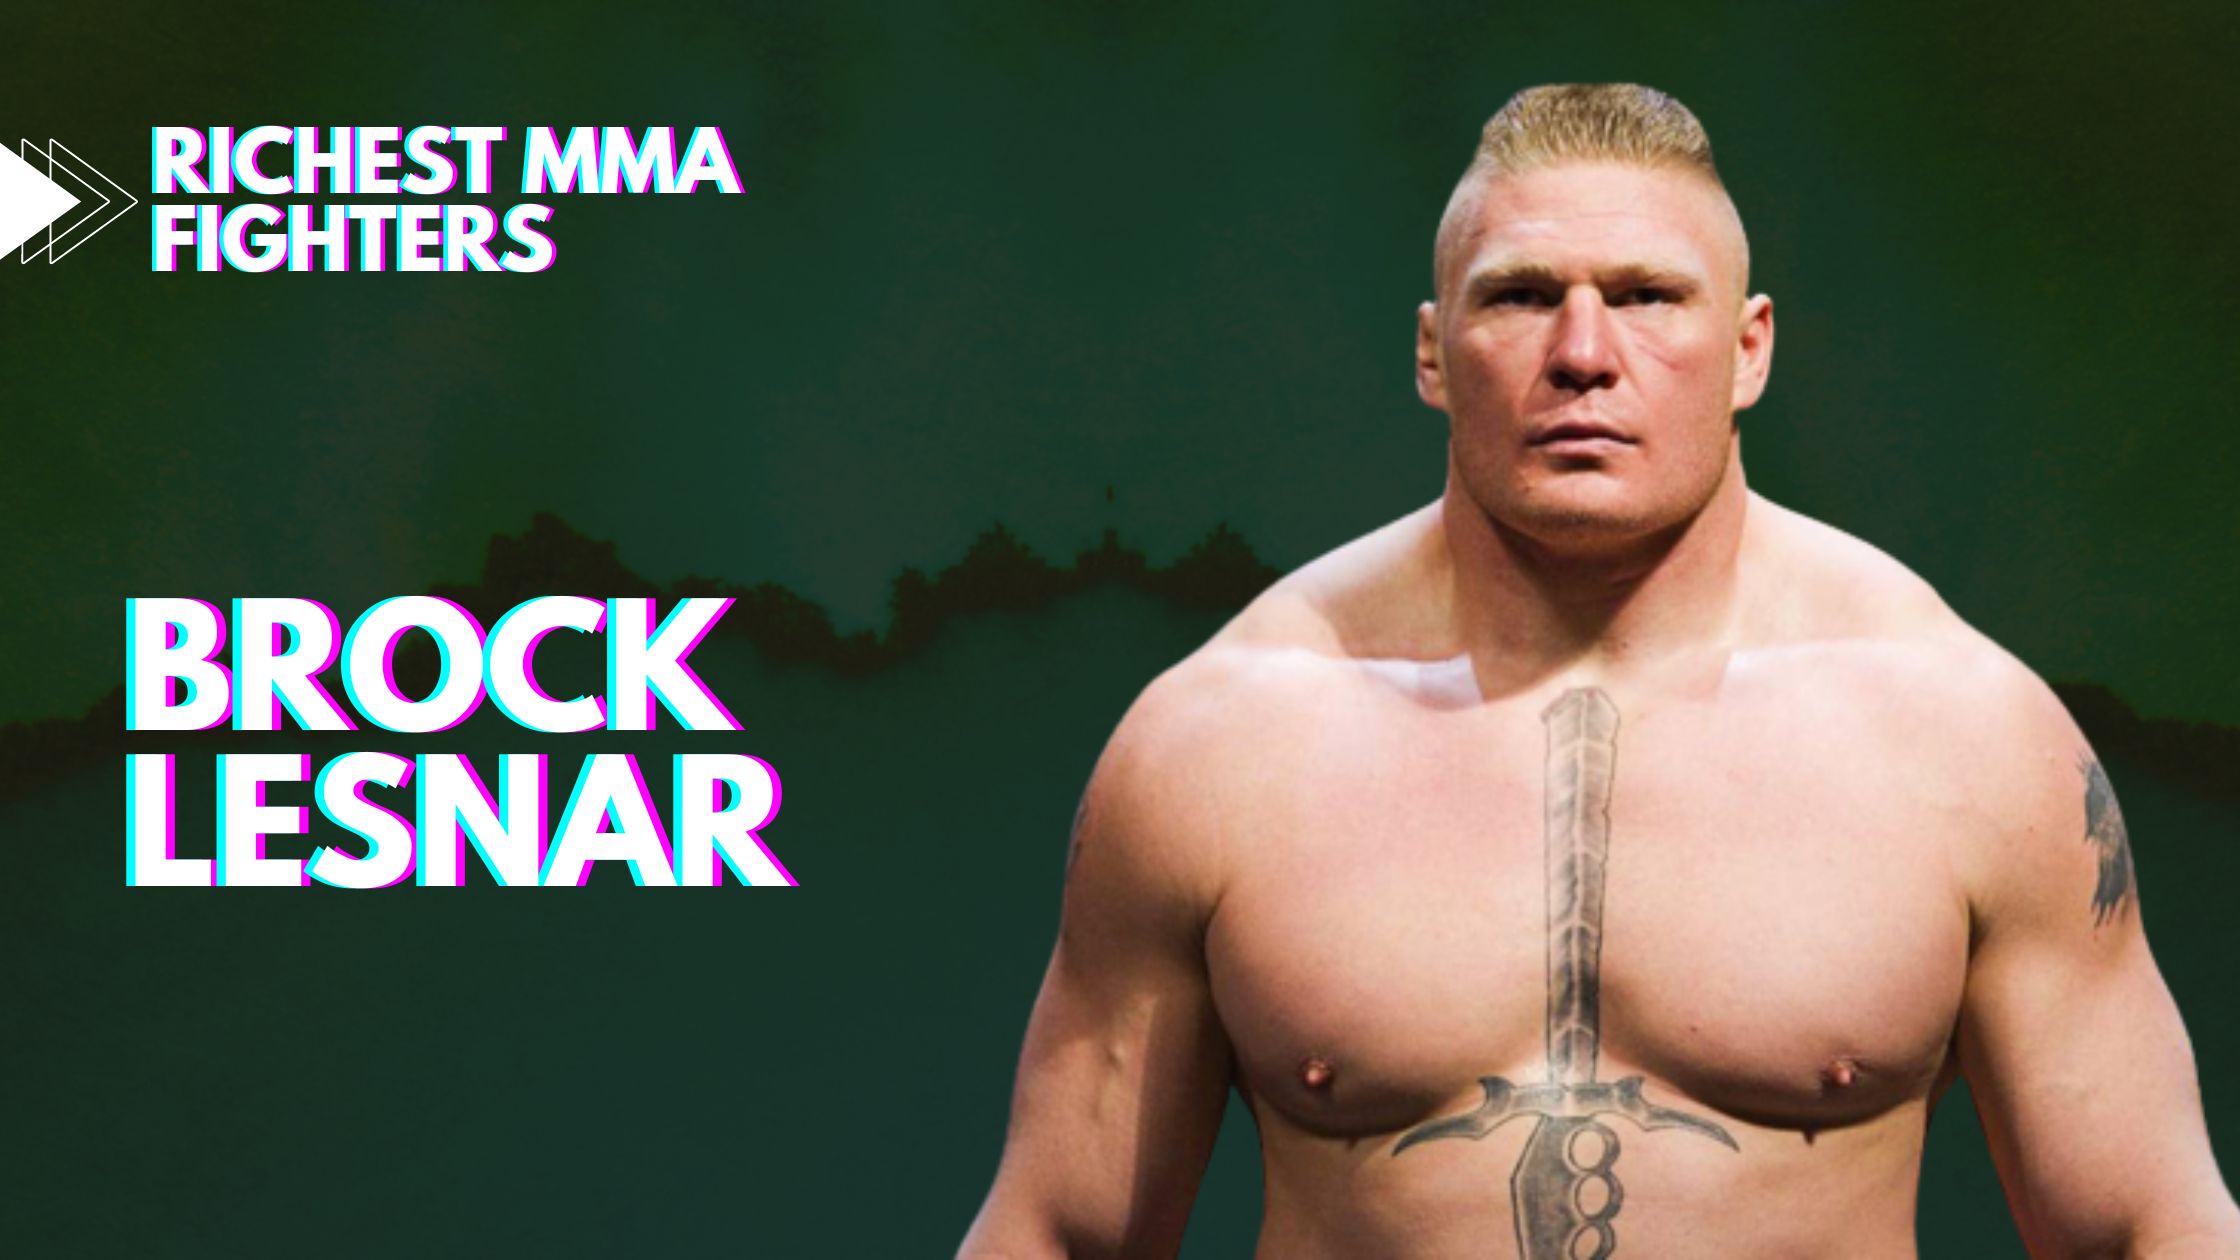  Brock Lesnar - Richest MMA fighters